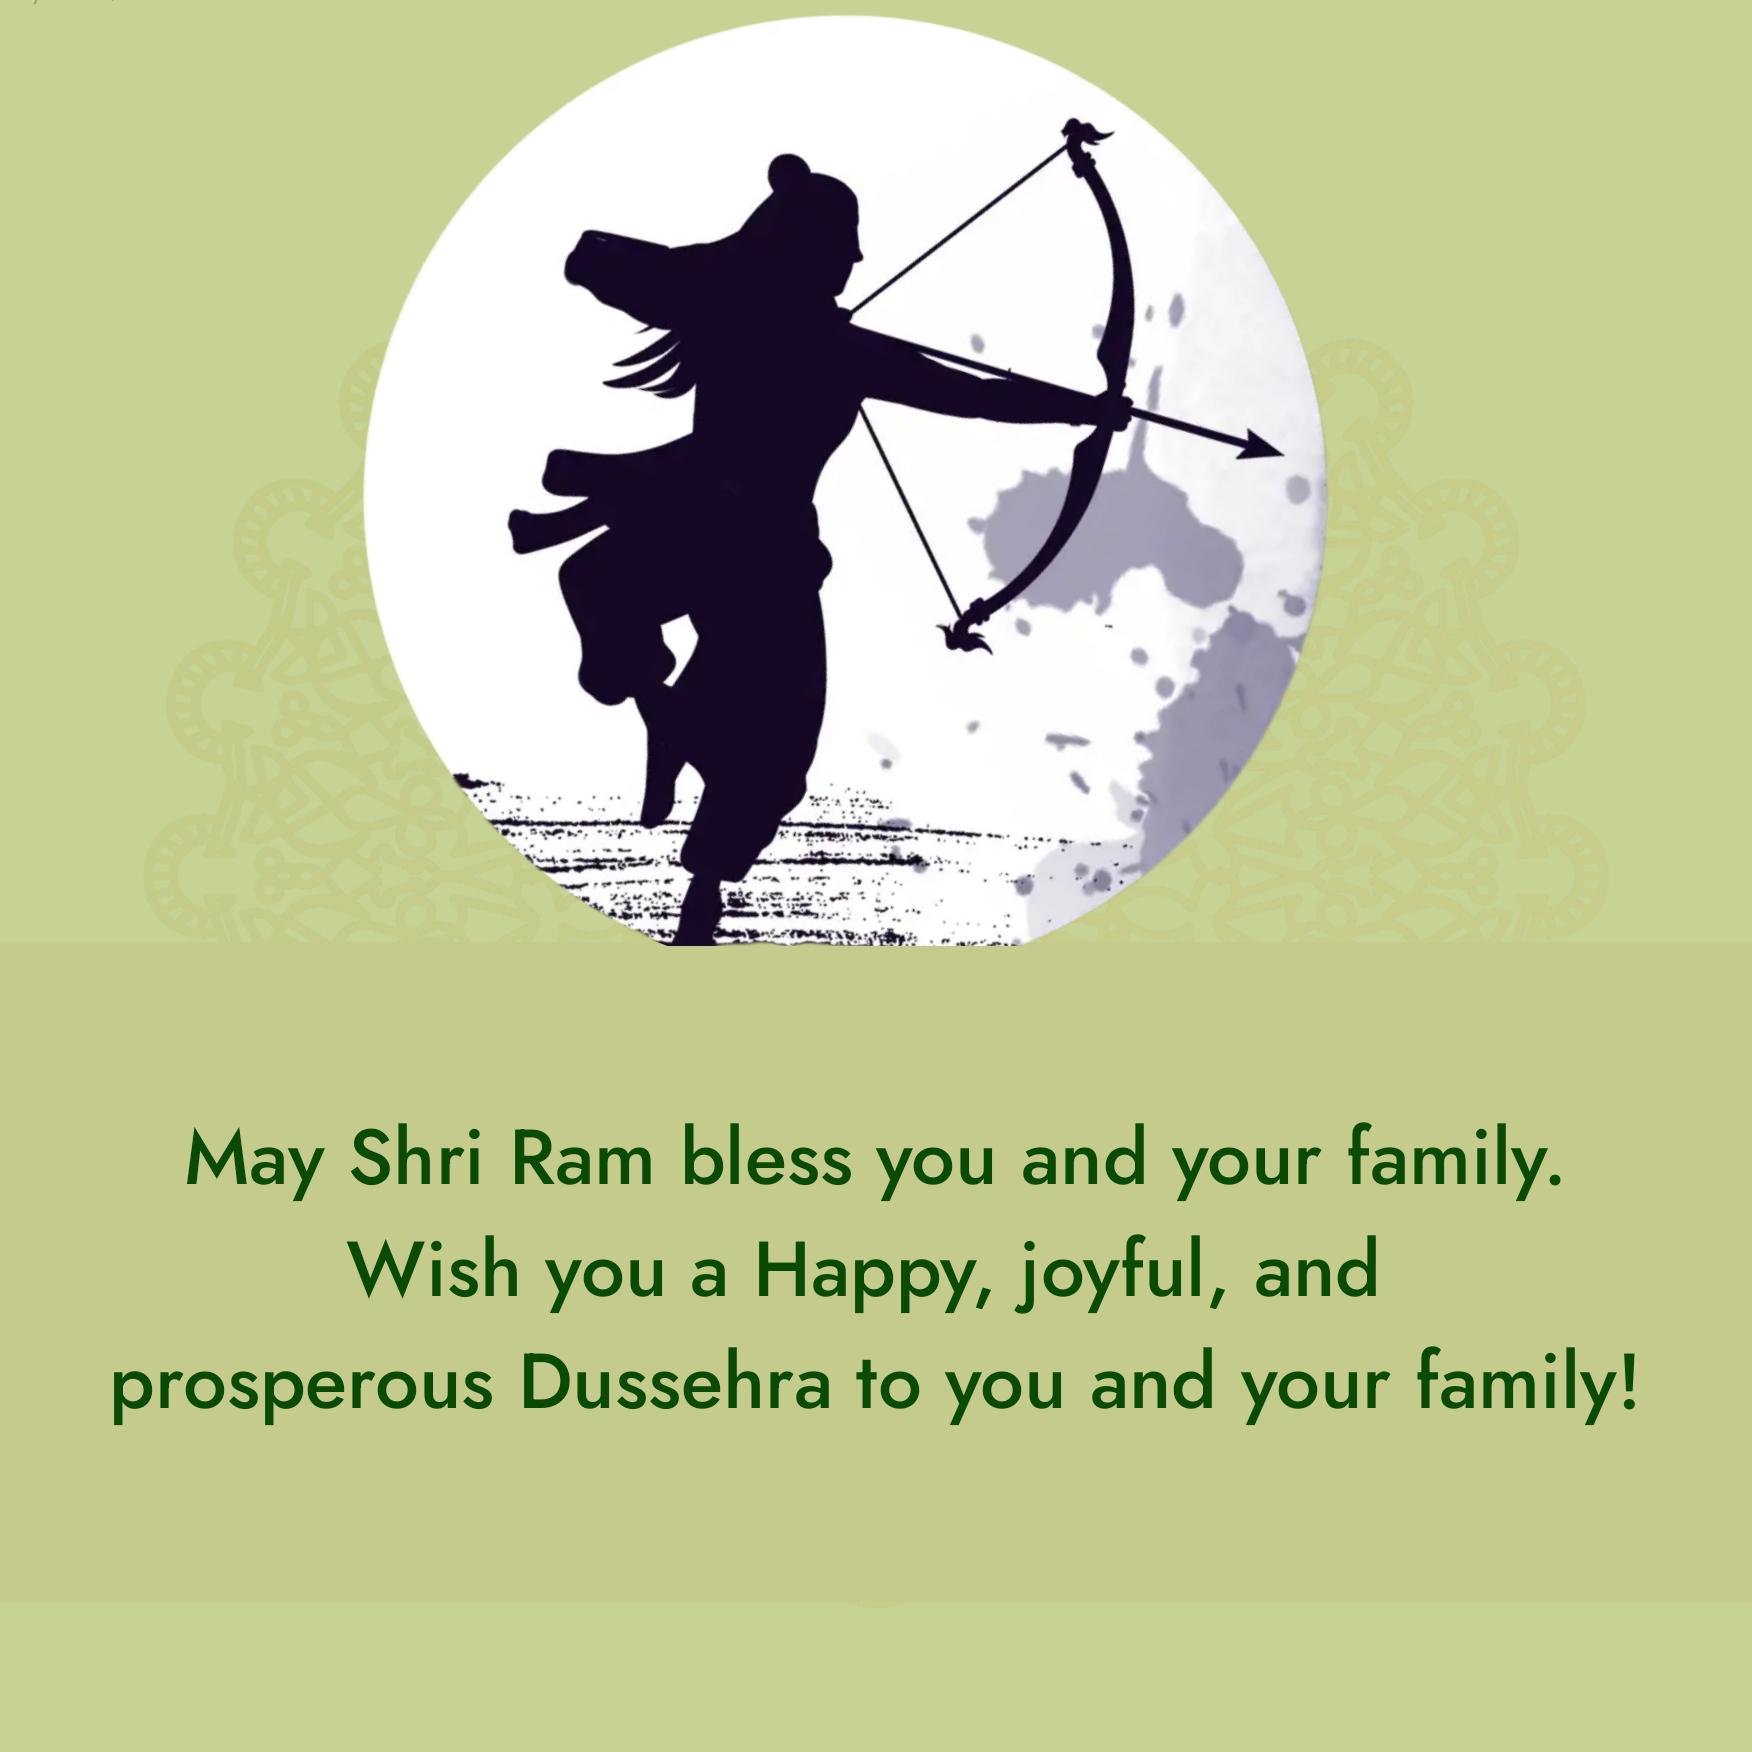 May Shri Ram bless you and your family